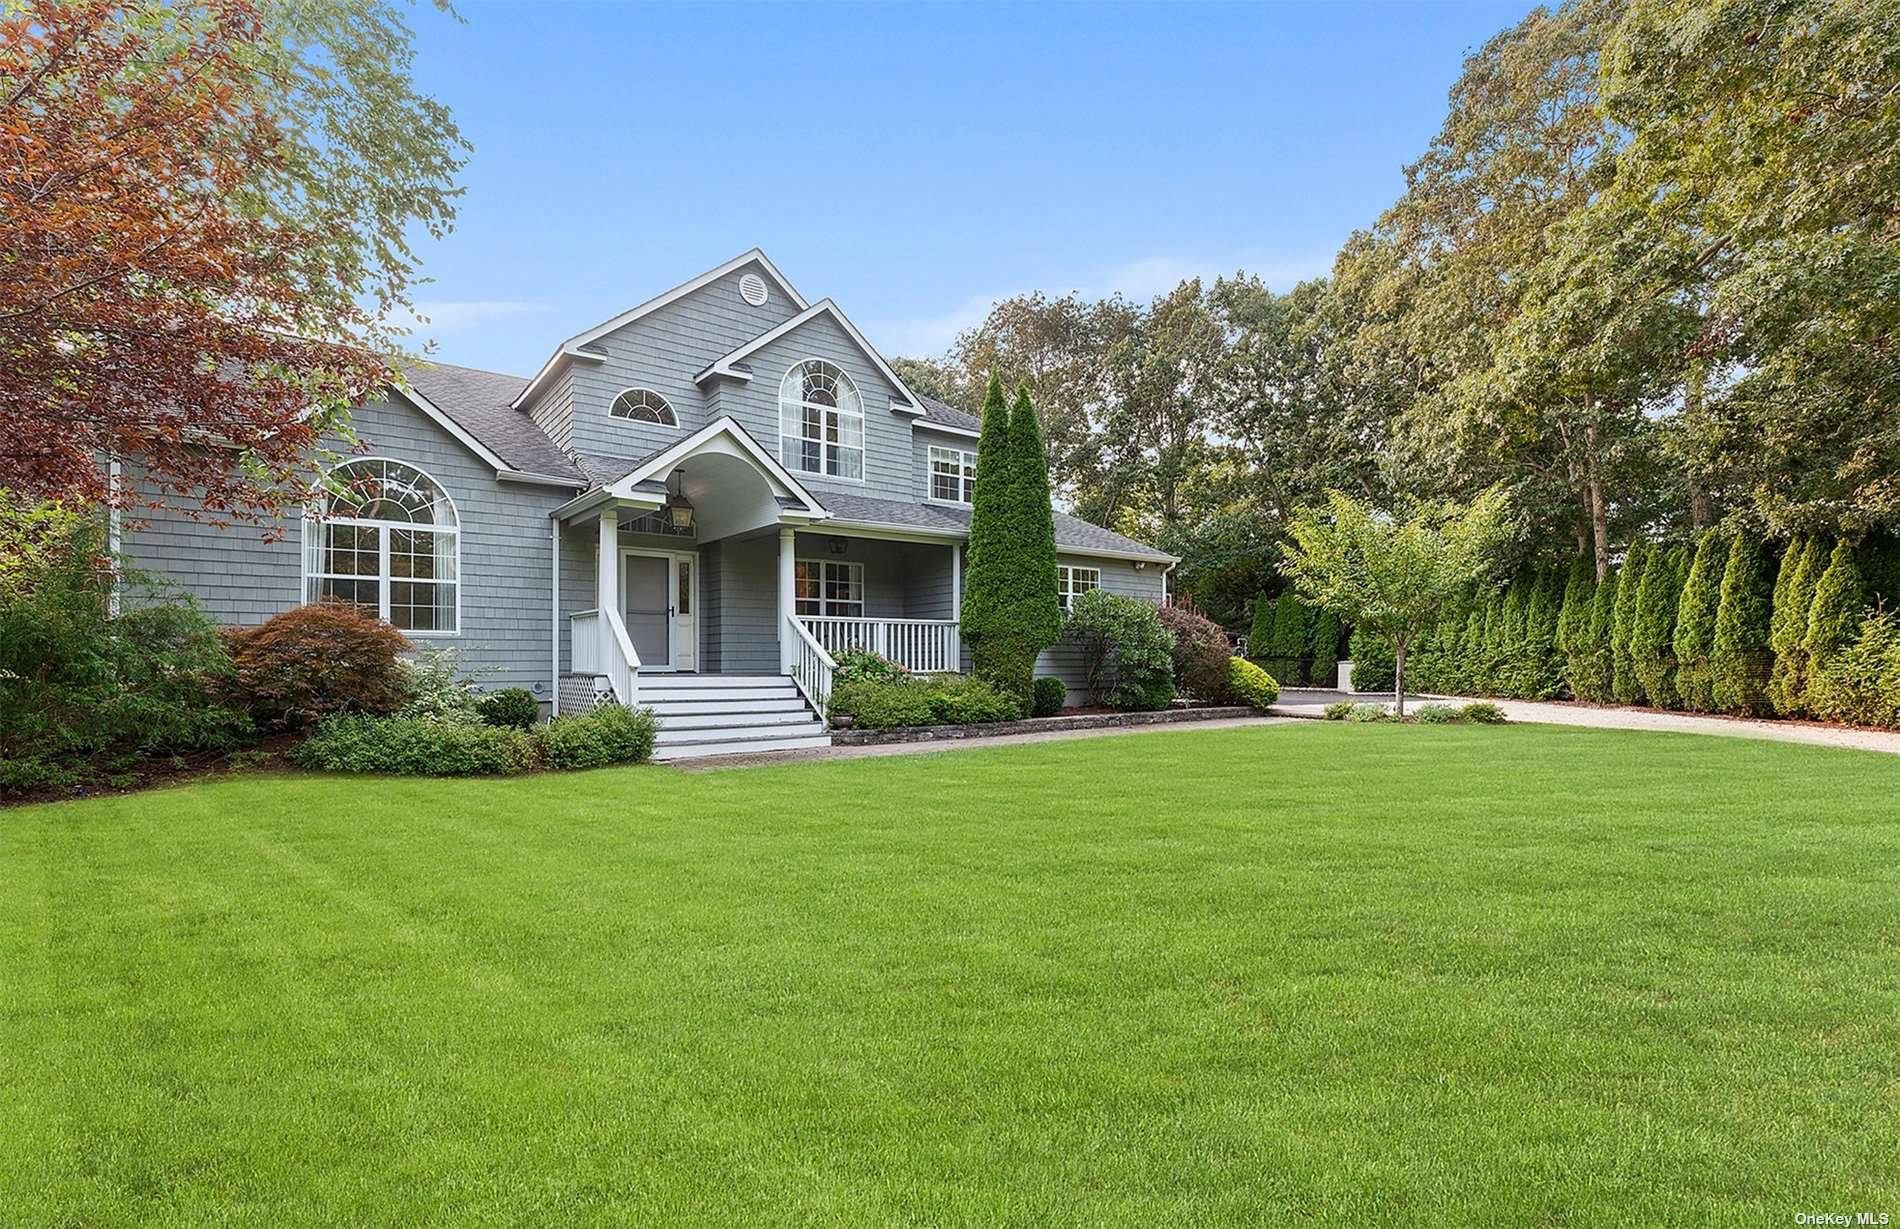 Down a long private driveway, sits this recently renovated Post Modern home with beautifully landscaped grounds offering 1.